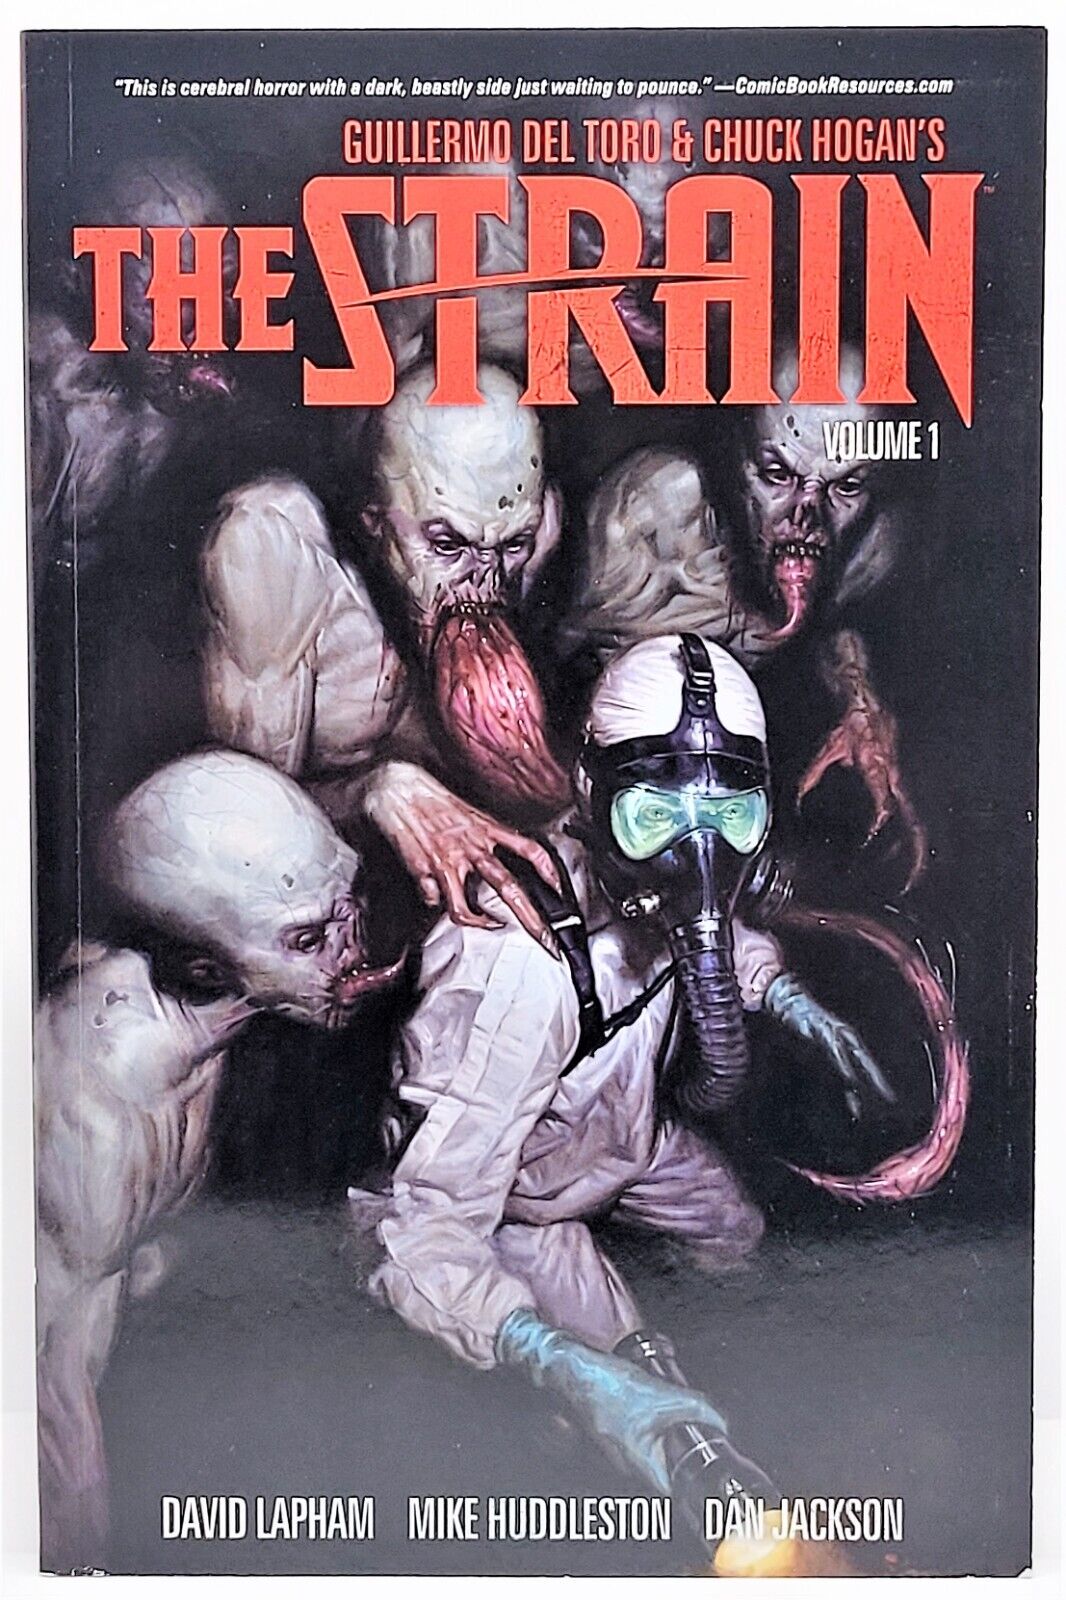 The Strain Volume 1 Graphic Novel Published By Dark Horse Comics - CO4